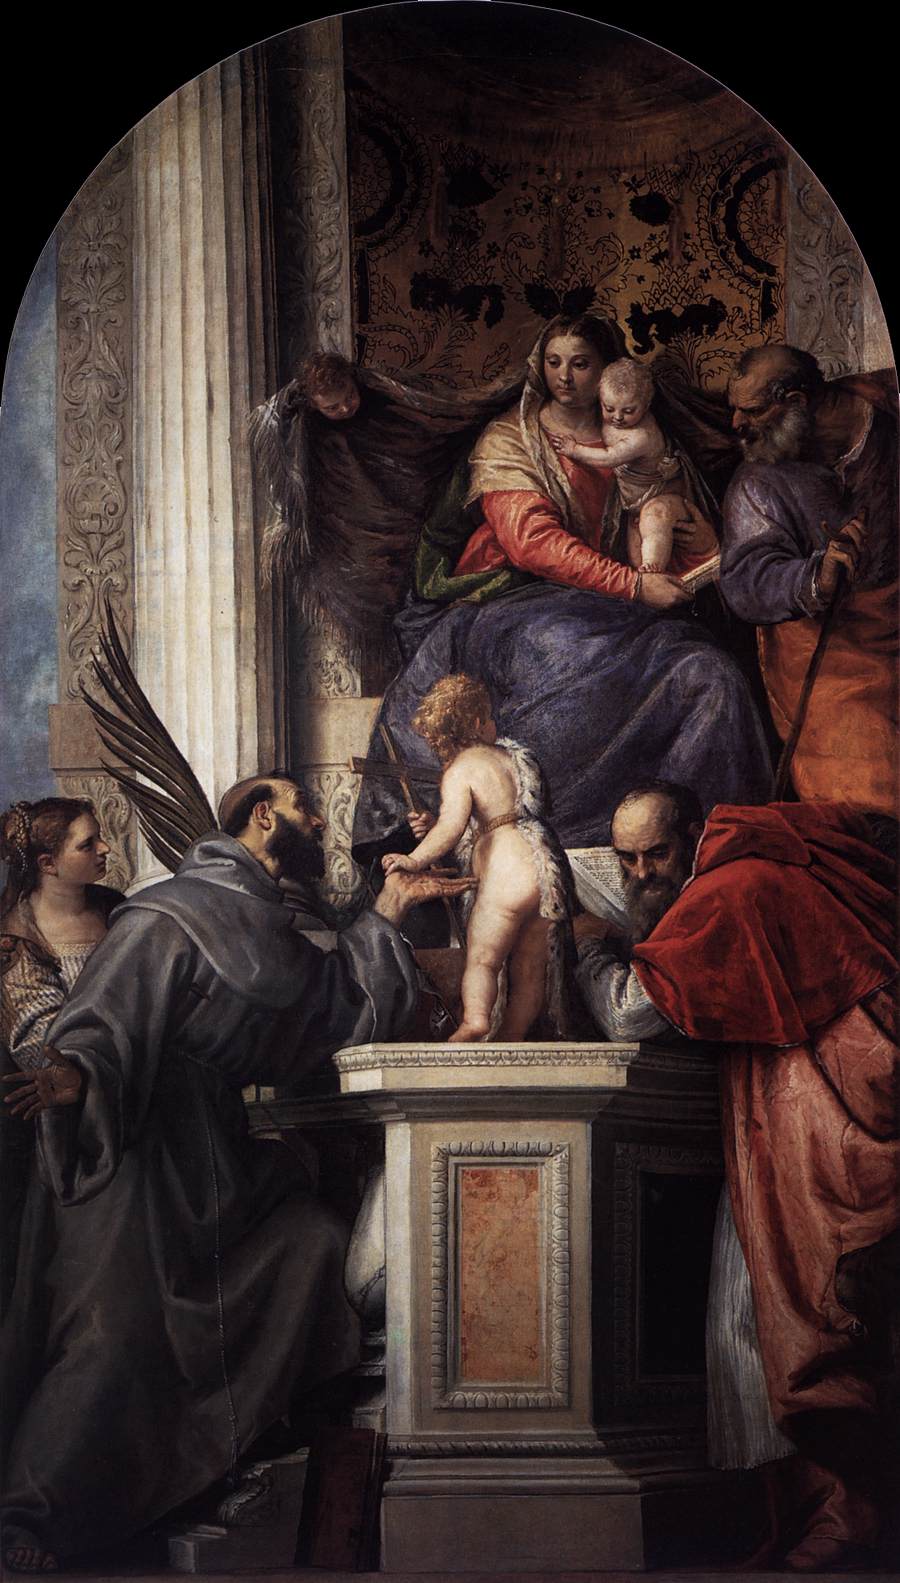 The Enthroned Virgin and Child, with the Infant Saint John the Baptist and Saints